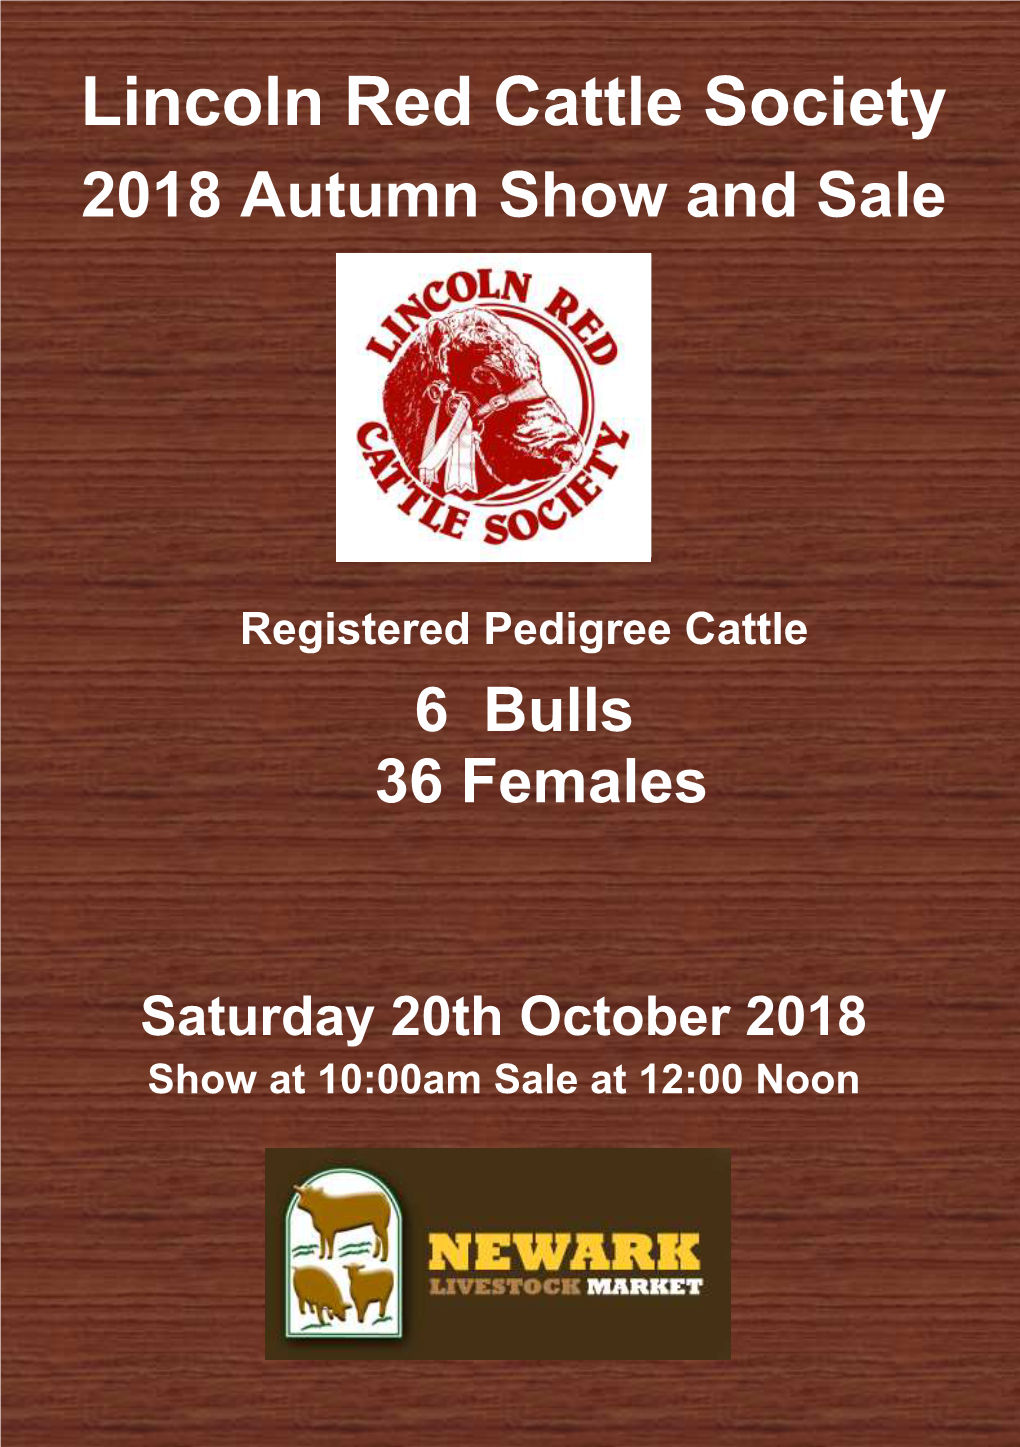 Lincoln Red Cattle Society 2018 Autumn Show and Sale